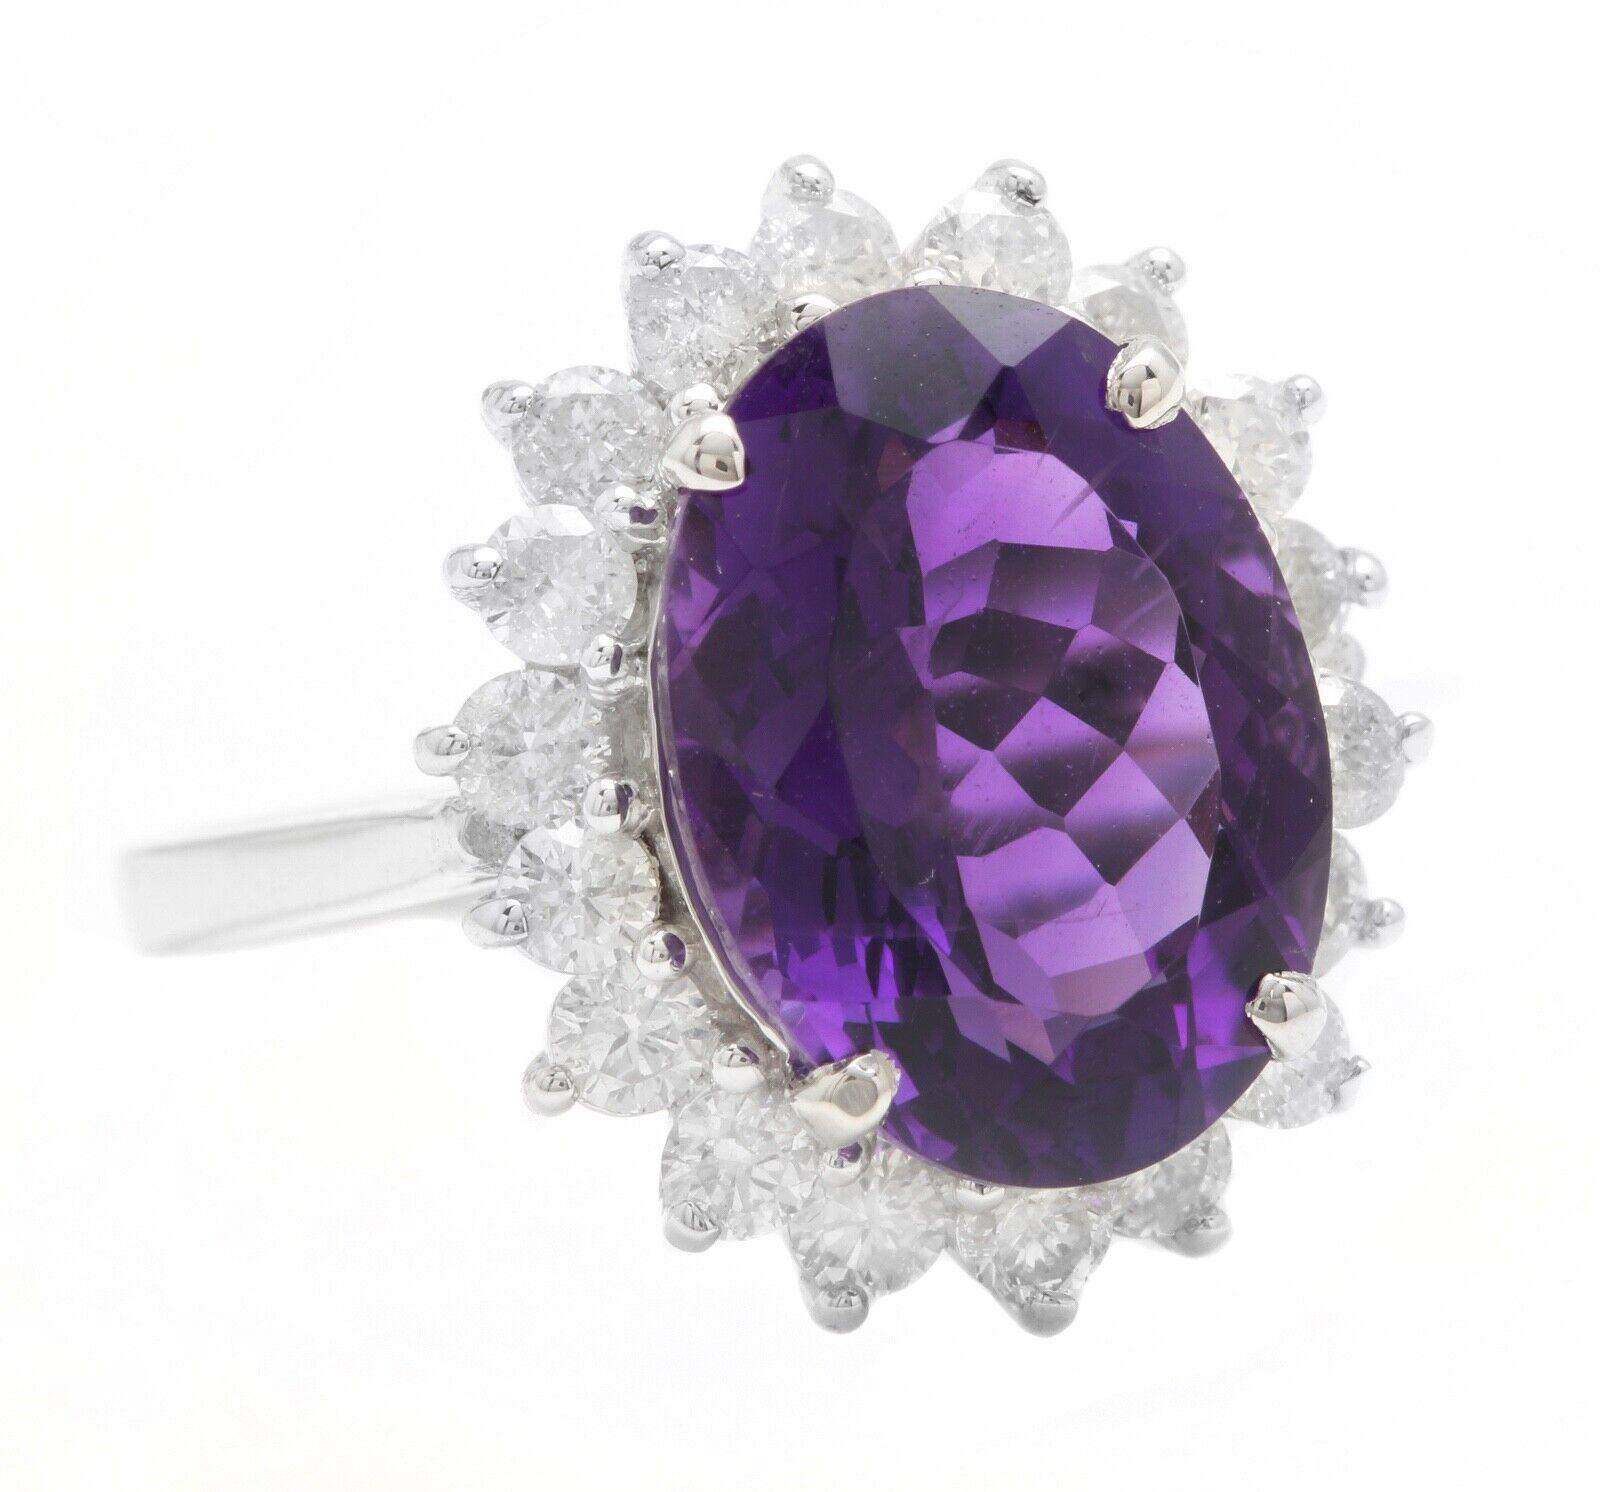 6.55 Carats Natural Amethyst and Diamond 14K Solid White Gold Ring

Suggested Replacement Value: $5,500.00

Total Natural Oval Cut Amethyst Weights: Approx. 5.50 Carats 

 Amethyst Measures: Approx. 14.00 x 10.00mm

Natural Round Diamonds Weight: